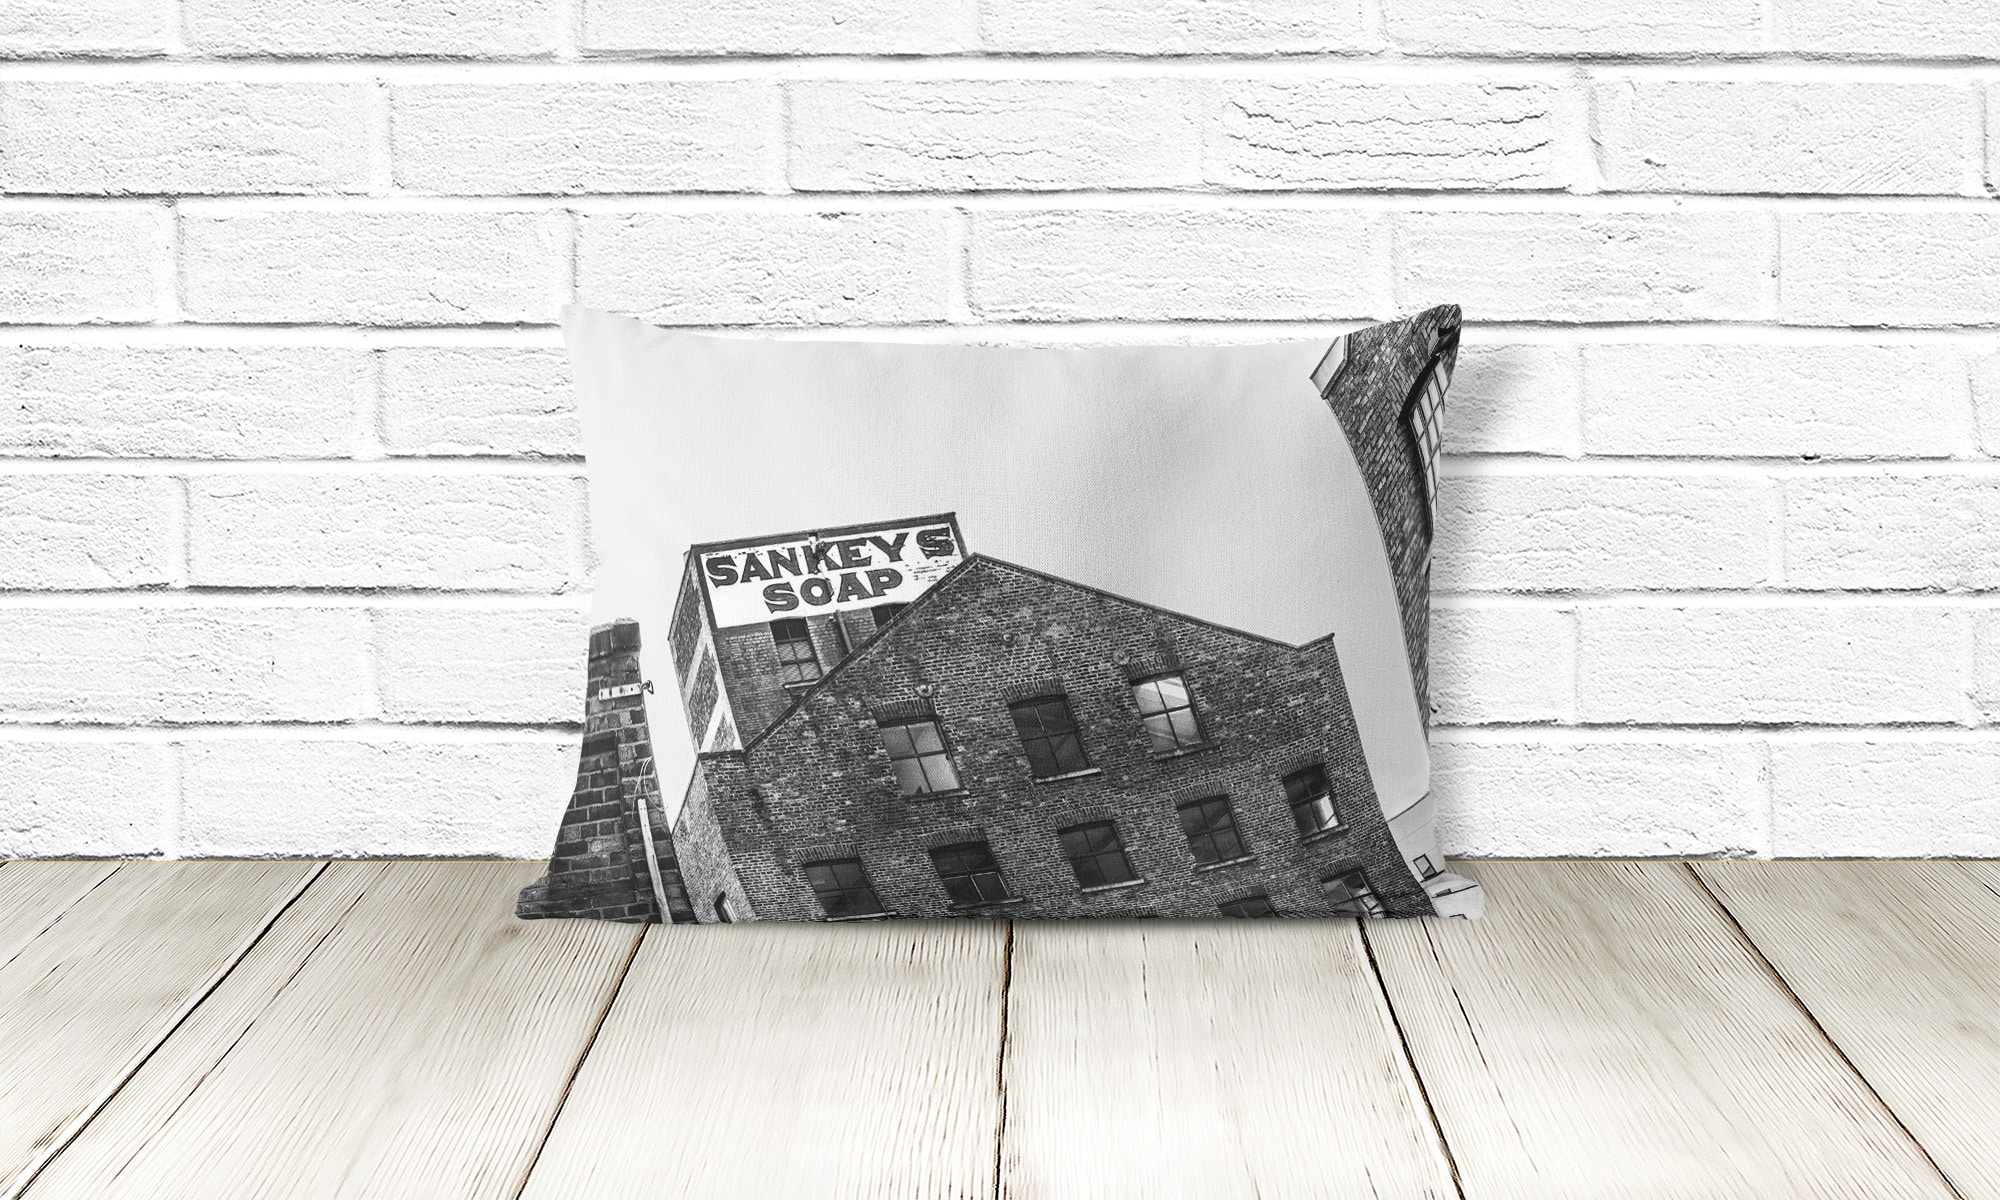 Sankey’s Soap Cushion Poster Art and Gift Ideas Cushions